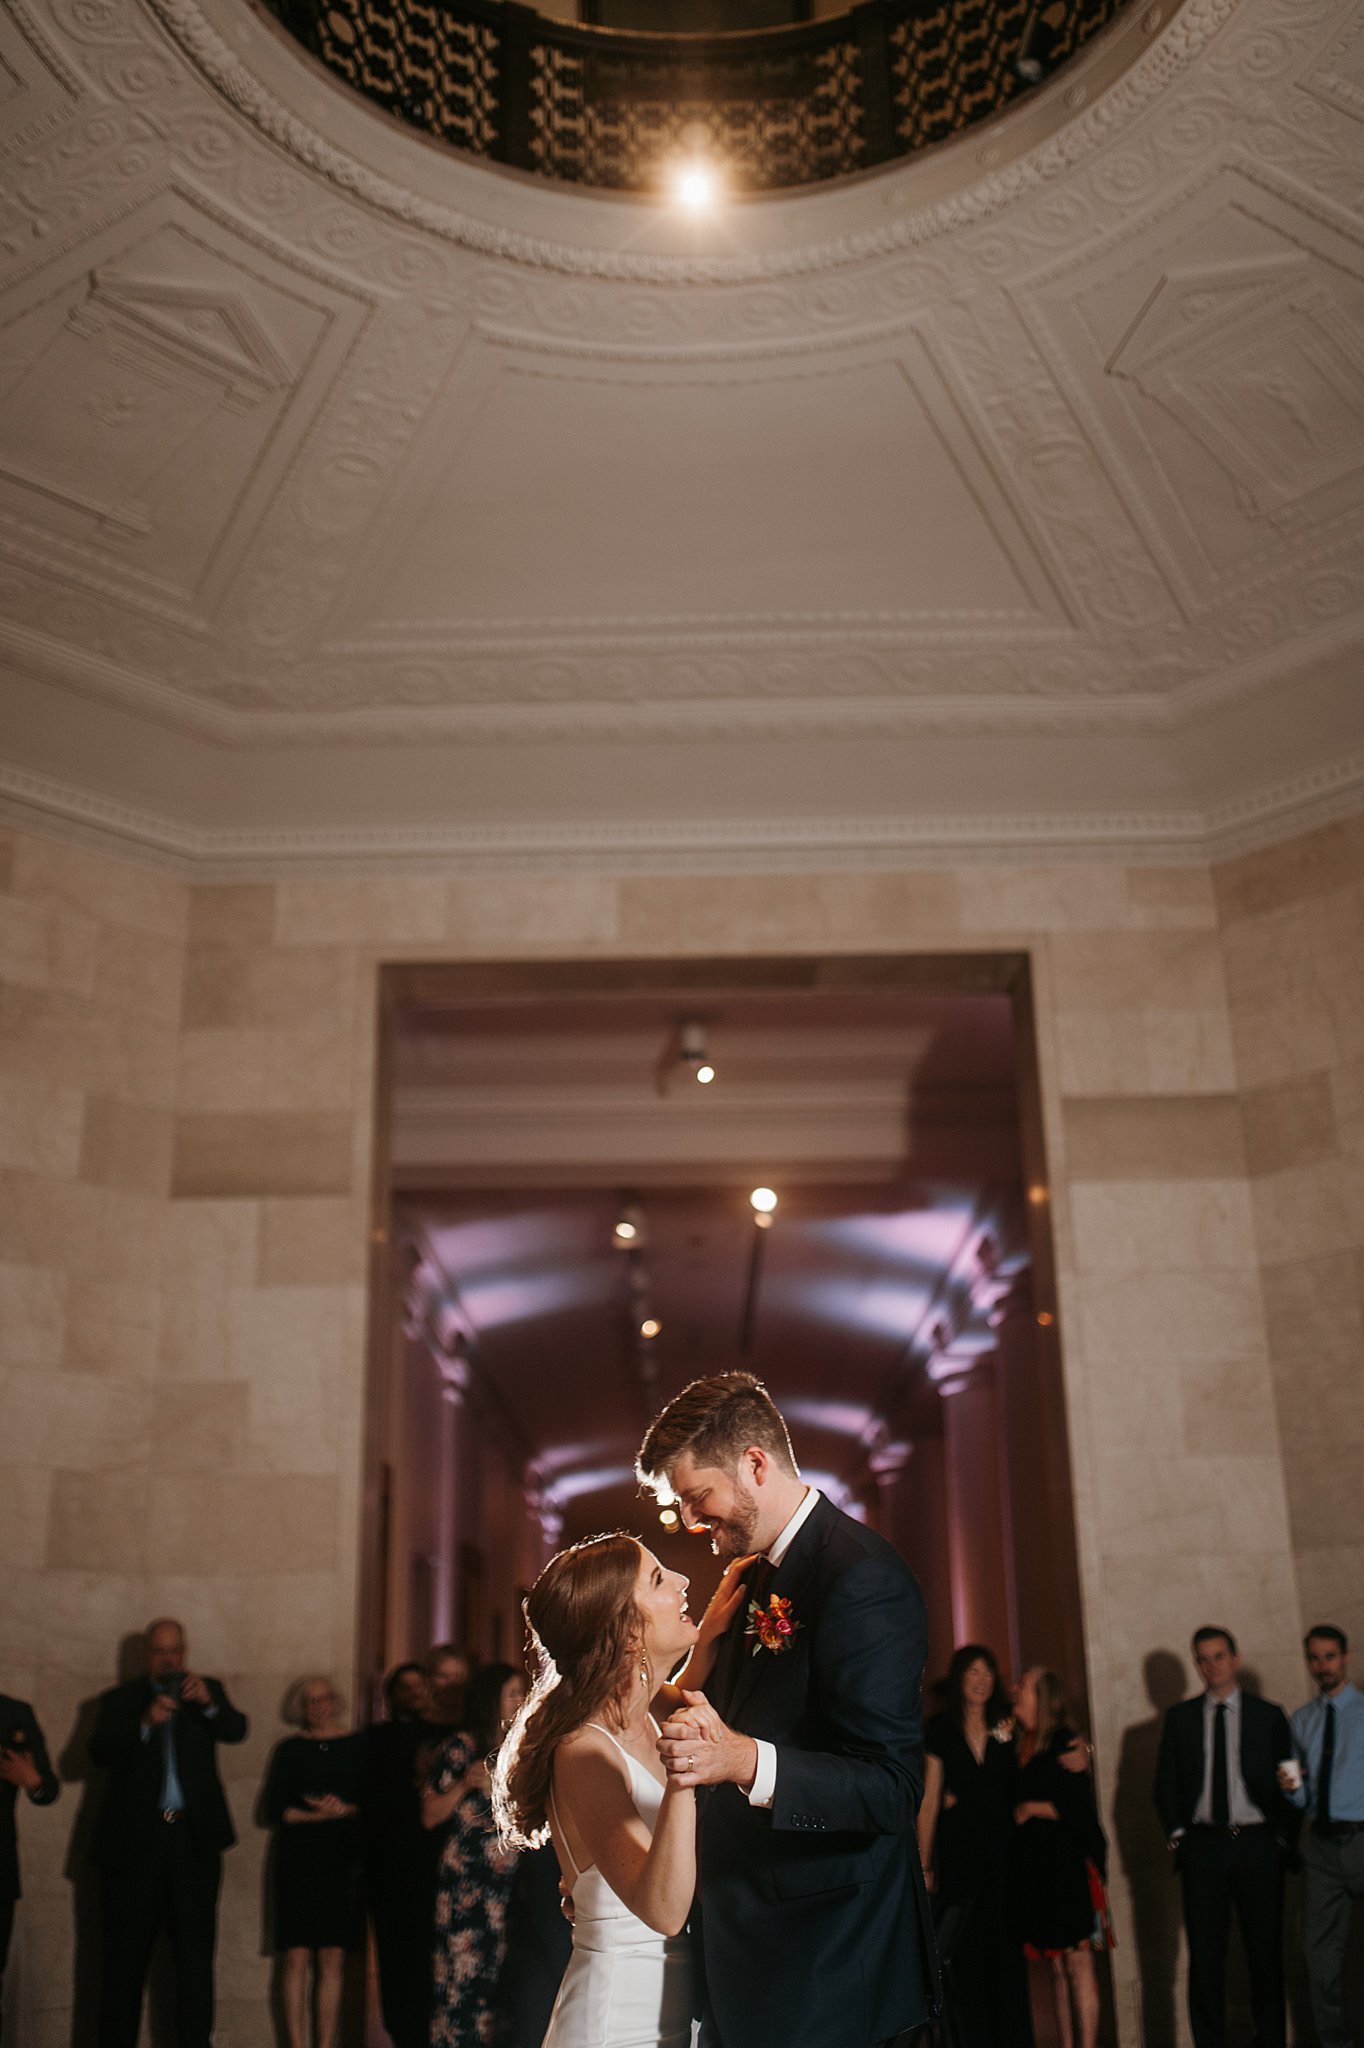 Couple shares first dance at wedding at Minneapolis Institute of Art